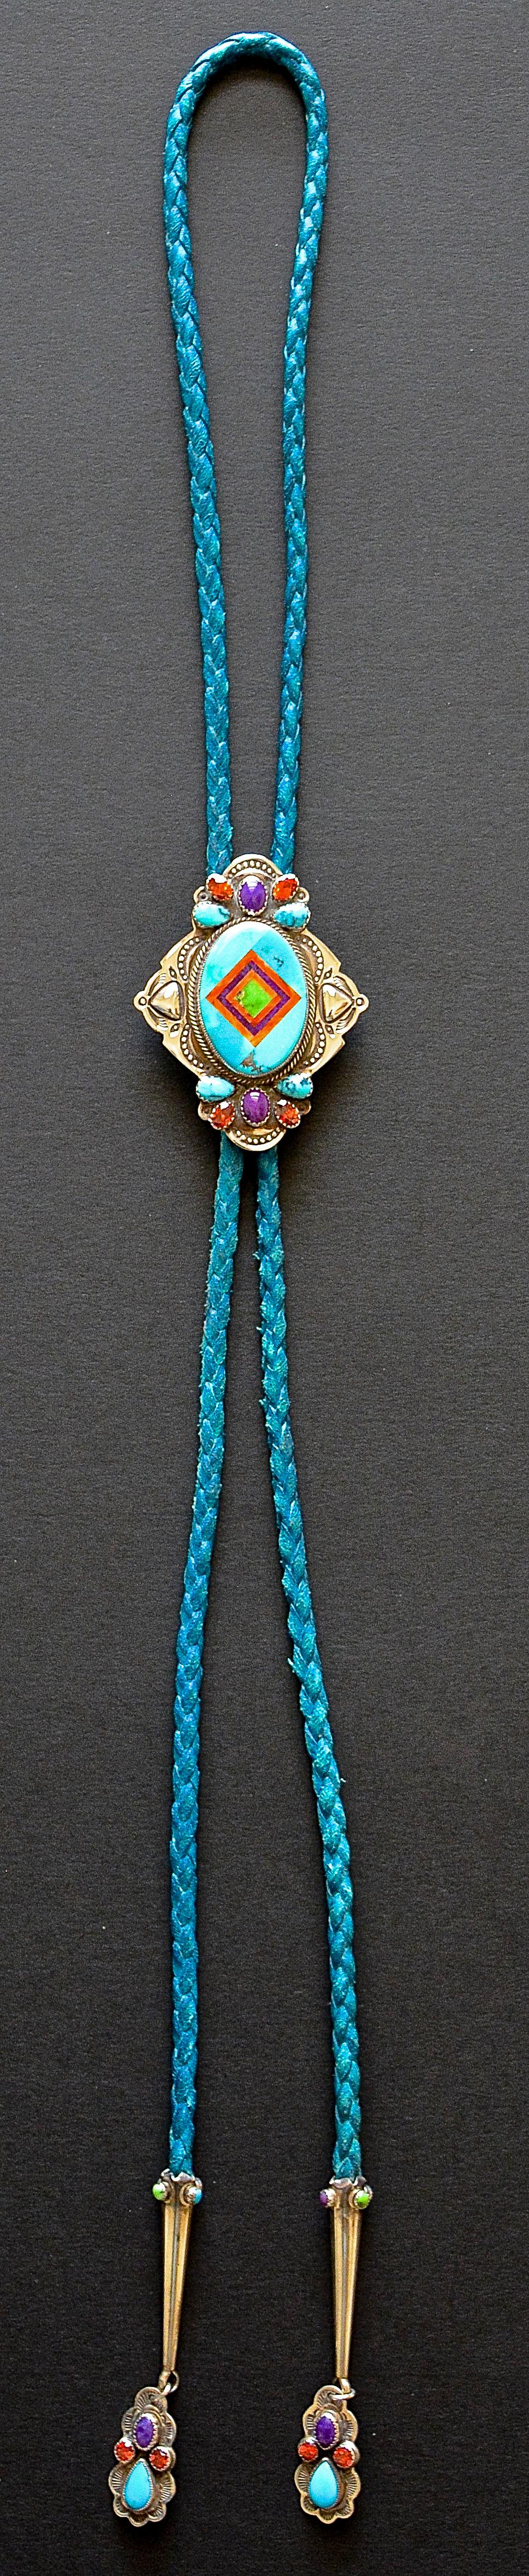 Unique Inlaid Multi-Gemstone and Sterling Silver Bolo Tie by Benny & Valerie Aldrich.

An exquisitely inlaid bolo made of many different stones including turquoise, spiny oyster, fire opal, sugilite, and varasite all set sterling silver. 

It has an